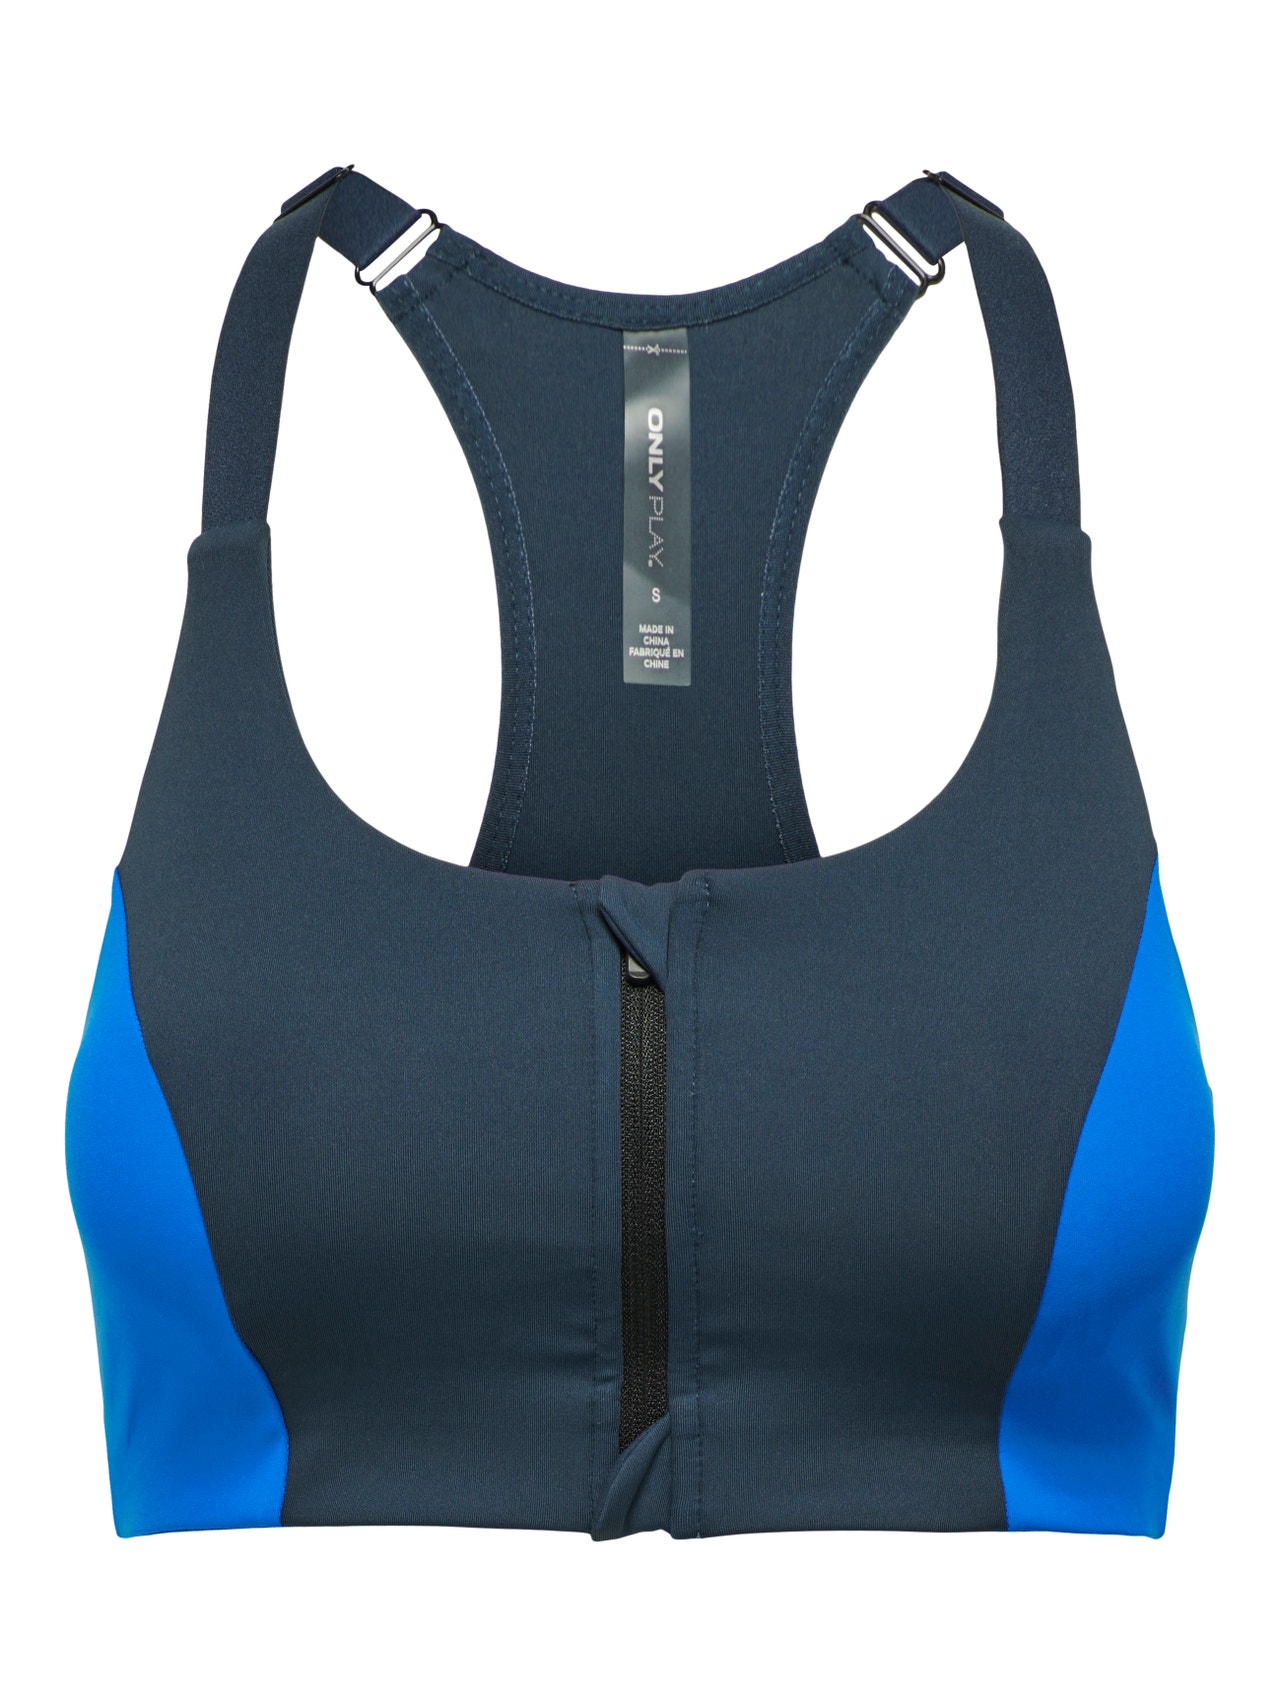 ONLY Adjustable Sports bra with High Support -Blue Nights - 15281008